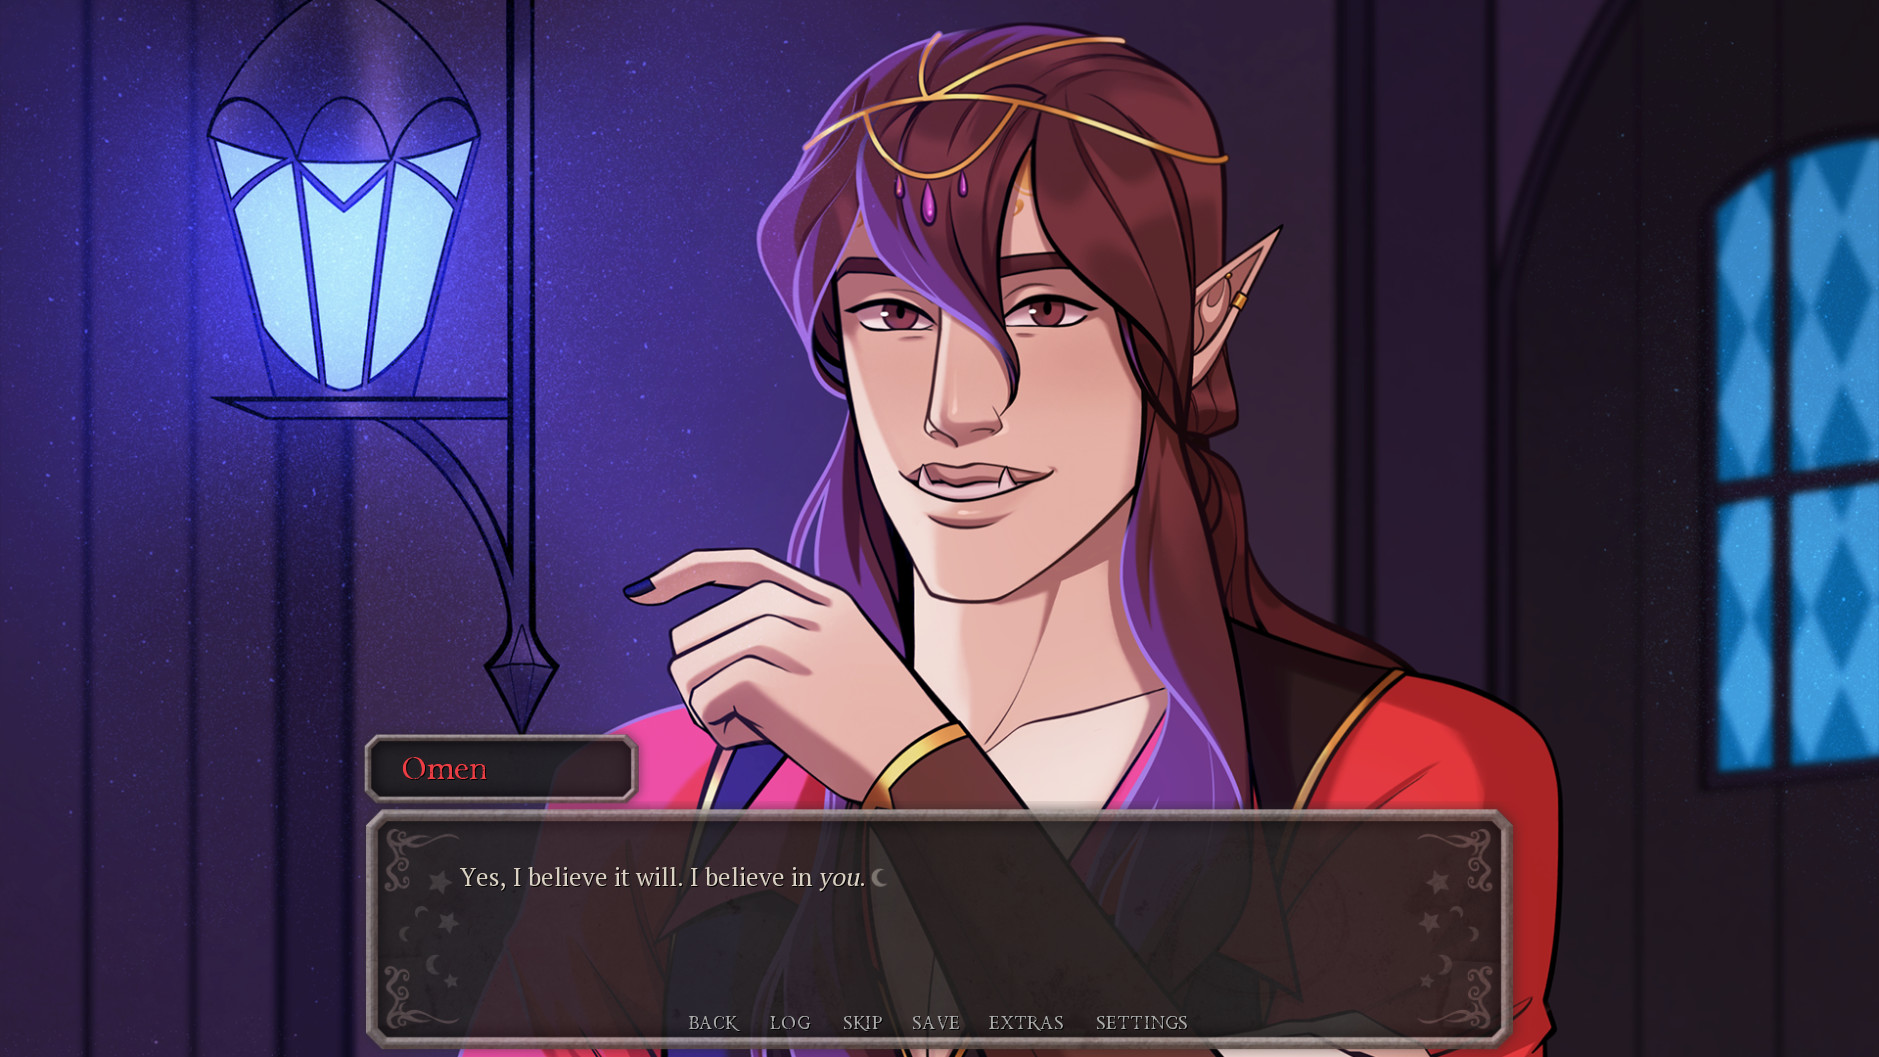 Gayming Awards Nomination: Best LGBTQ Indie Game! - When The Night Comes by  Lunaris Games